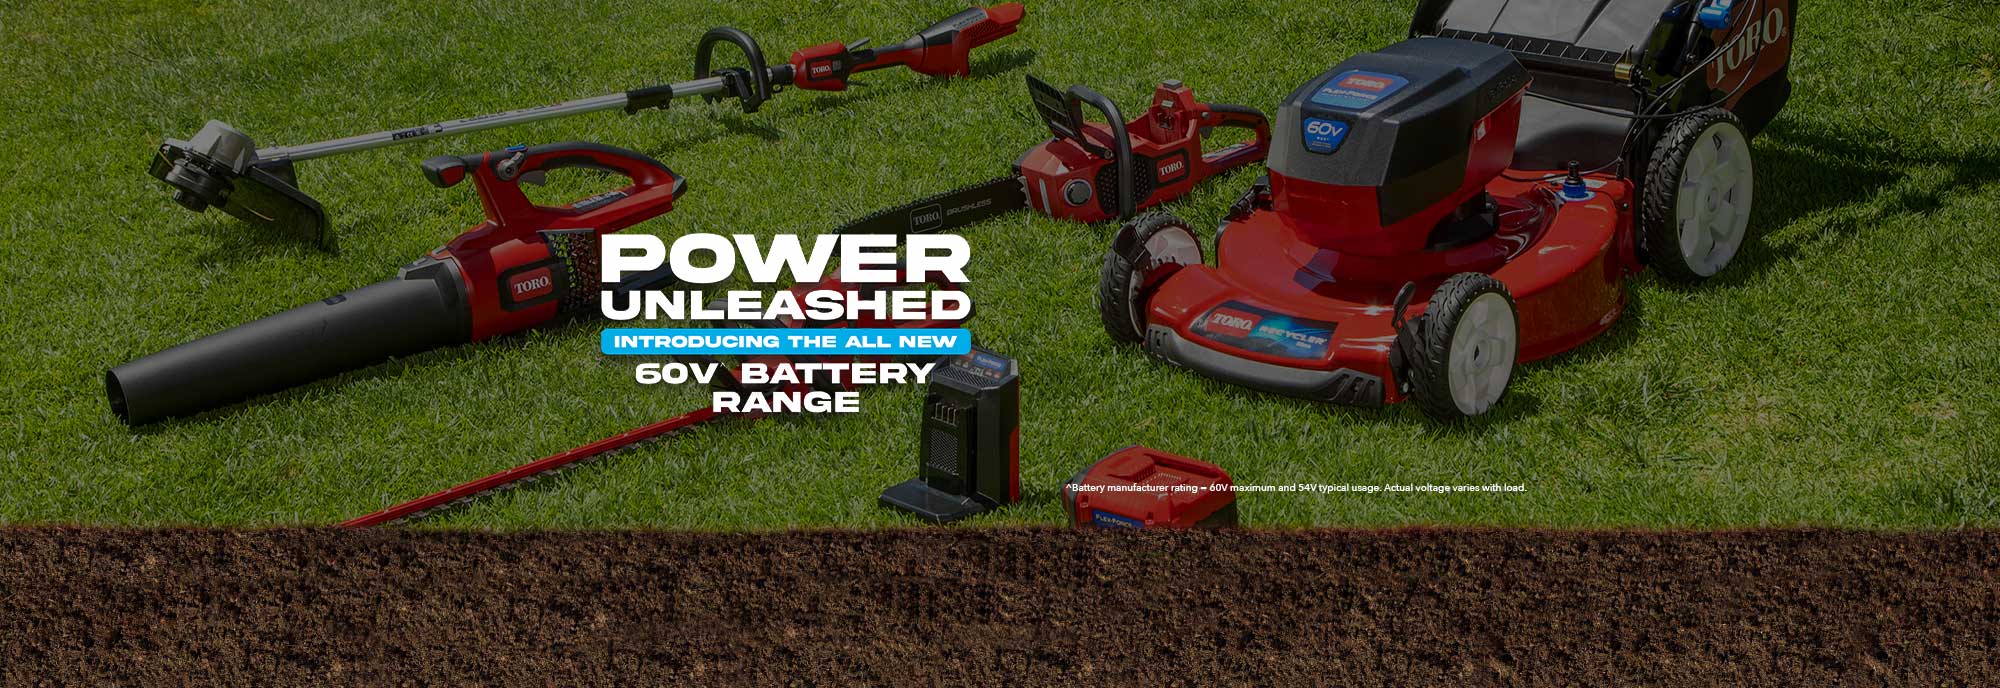 Introducing the brand new 60V battery range